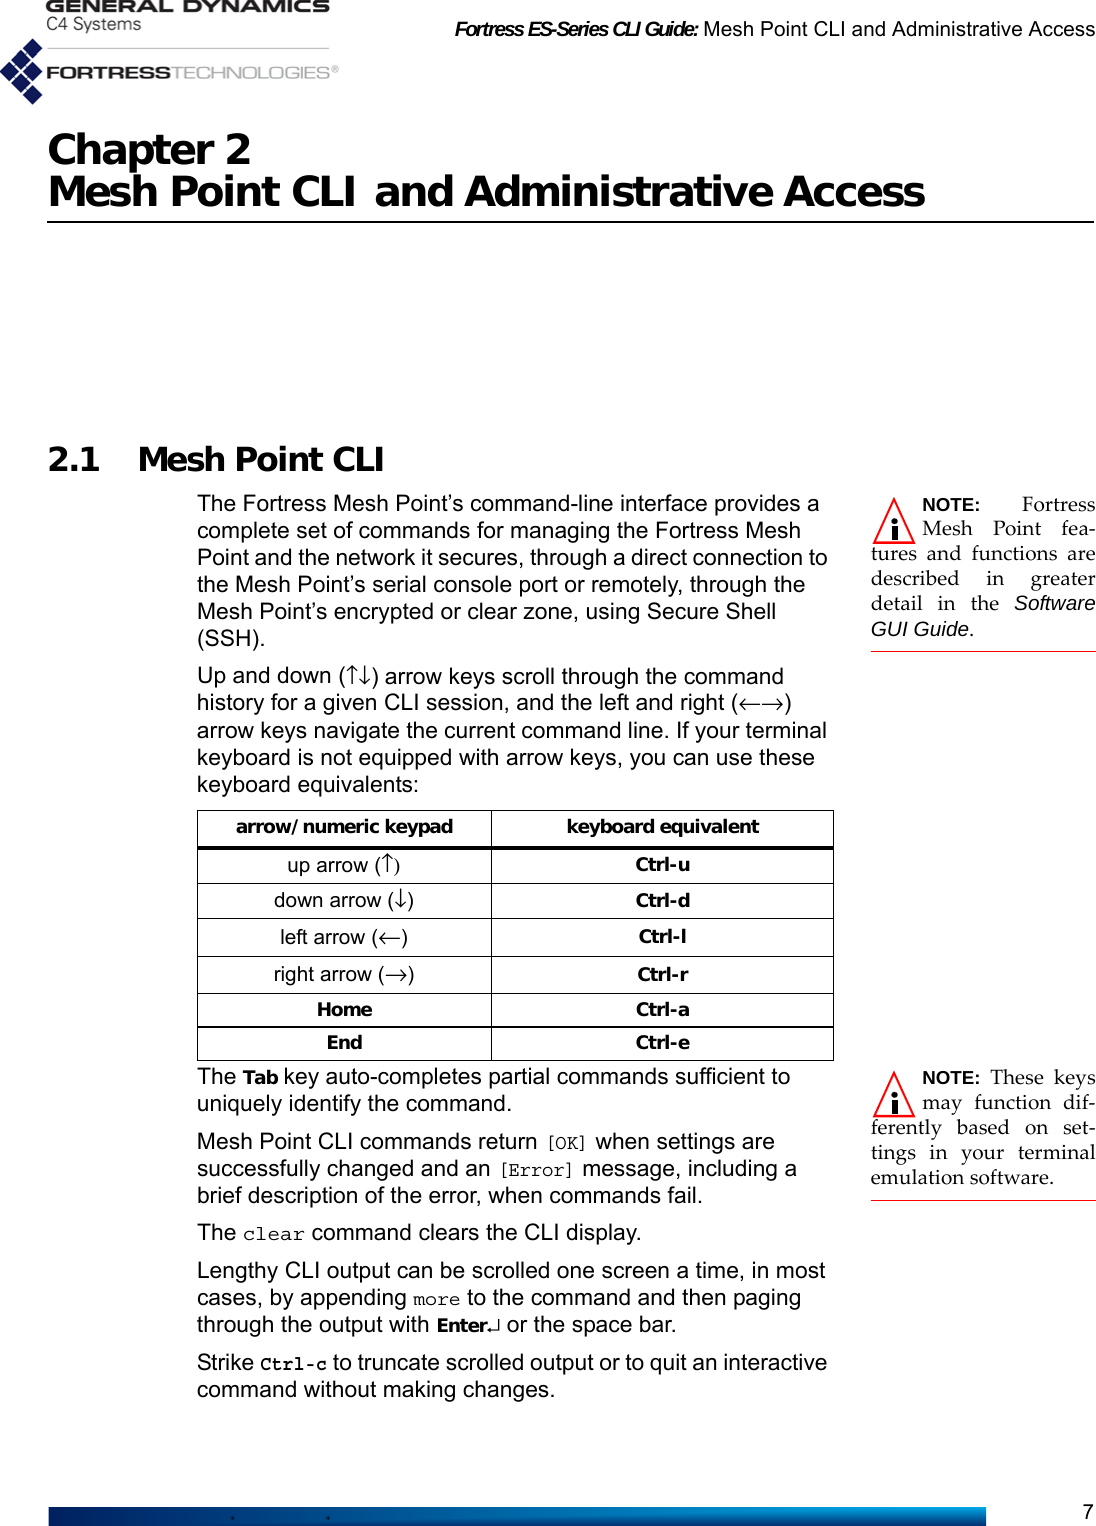 Fortress ES-Series CLI Guide: Mesh Point CLI and Administrative Access7Chapter 2Mesh Point CLI and Administrative Access2.1 Mesh Point CLINOTE: FortressMesh Point fea-tures and functions aredescribed in greaterdetail in the SoftwareGUI Guide.The Fortress Mesh Point’s command-line interface provides a complete set of commands for managing the Fortress Mesh Point and the network it secures, through a direct connection to the Mesh Point’s serial console port or remotely, through the Mesh Point’s encrypted or clear zone, using Secure Shell (SSH).Up and down (↑↓) arrow keys scroll through the command history for a given CLI session, and the left and right (←→) arrow keys navigate the current command line. If your terminal keyboard is not equipped with arrow keys, you can use these keyboard equivalents:NOTE:  These keysmay function dif-ferently based on set-tings in your terminalemulation software.  The Tab key auto-completes partial commands sufficient to uniquely identify the command.Mesh Point CLI commands return [OK] when settings are successfully changed and an [Error] message, including a brief description of the error, when commands fail.The clear command clears the CLI display.Lengthy CLI output can be scrolled one screen a time, in most cases, by appending more to the command and then paging through the output with Enter↵ or the space bar. Strike Ctrl-c to truncate scrolled output or to quit an interactive command without making changes.arrow/numeric keypad keyboard equivalentup arrow (↑) Ctrl-udown arrow (↓)Ctrl-dleft arrow (←)Ctrl-lright arrow (→)Ctrl-rHome Ctrl-aEnd Ctrl-e